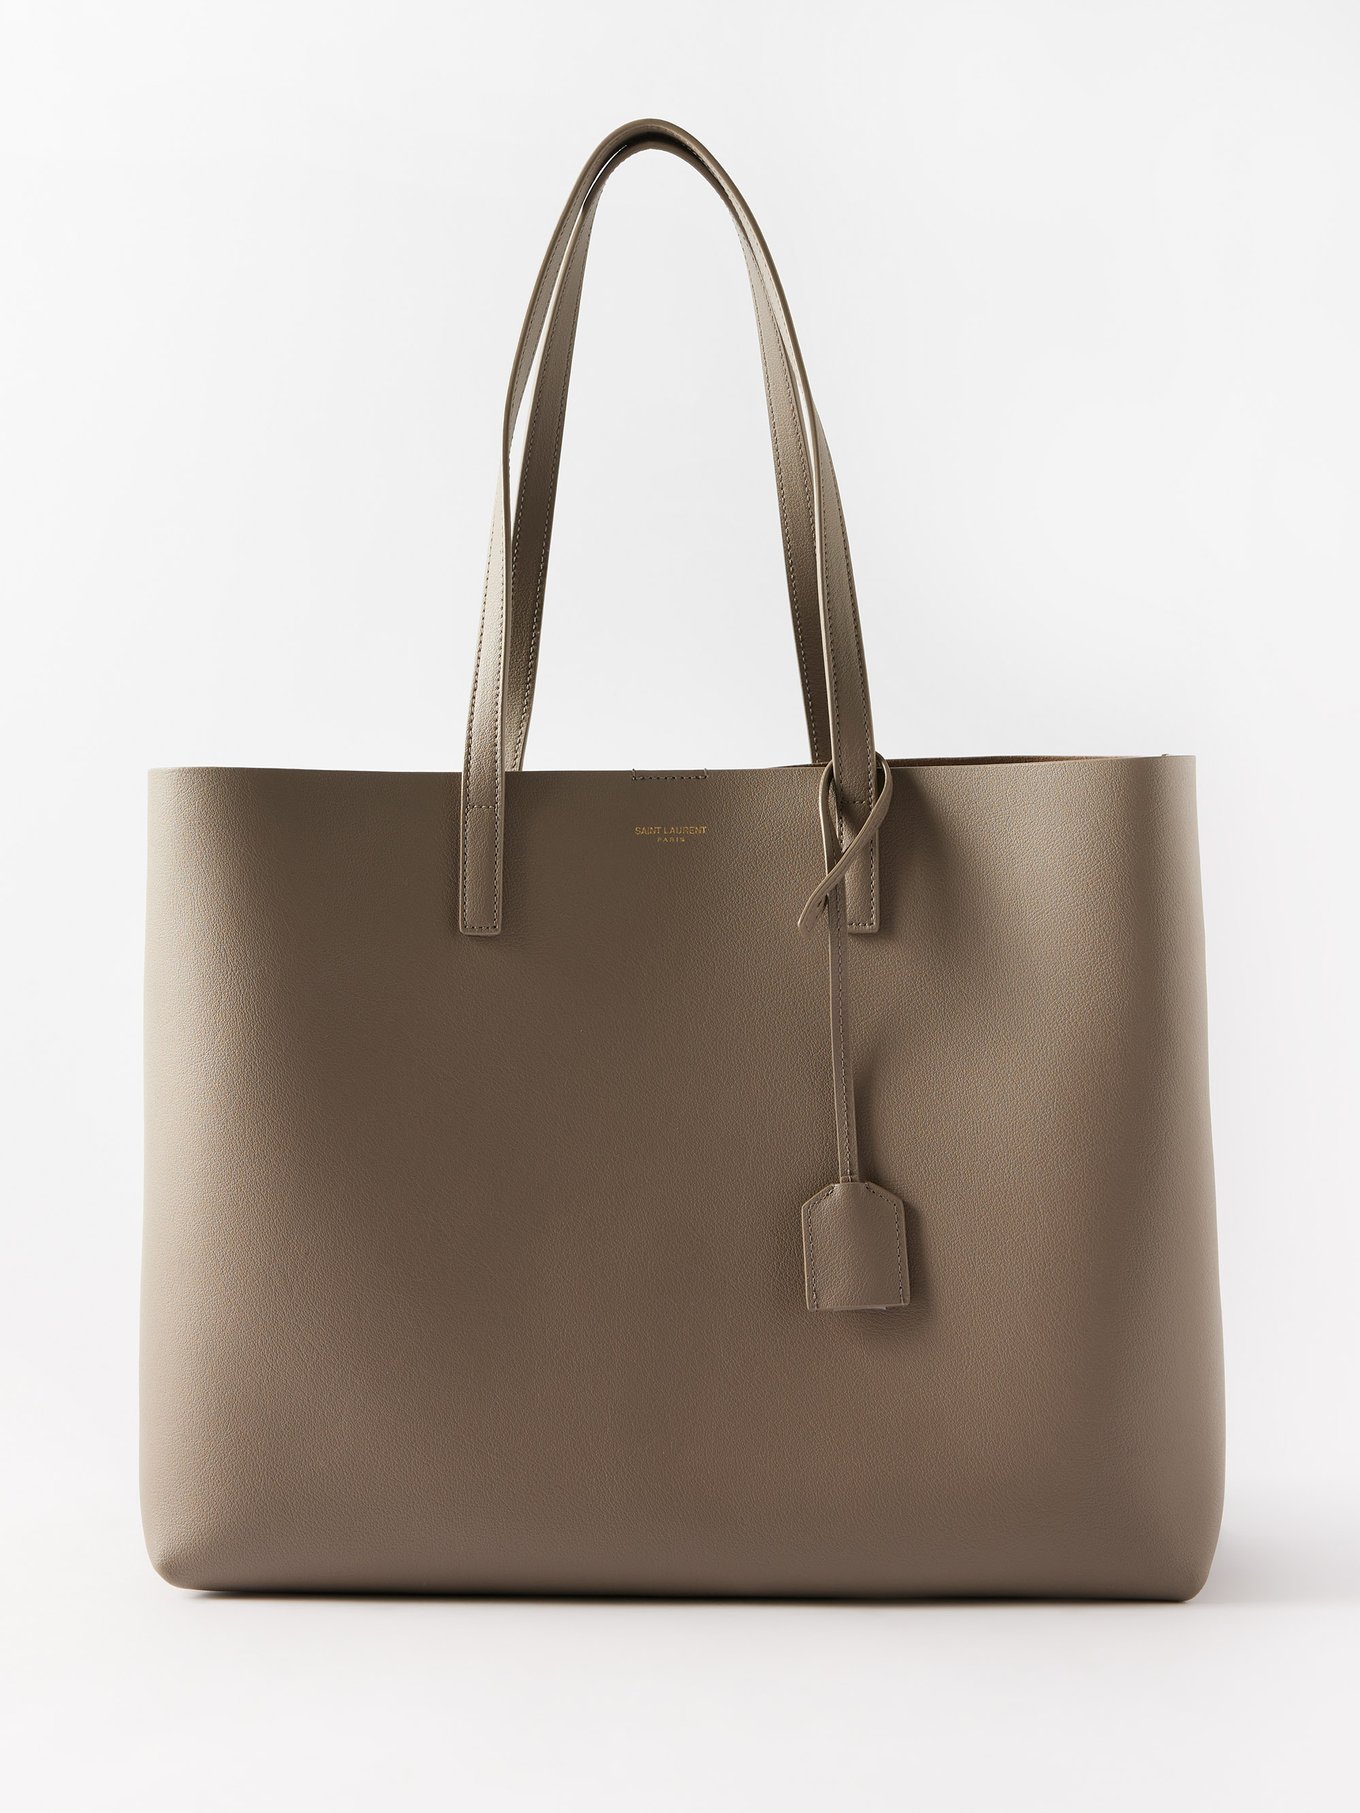 Shopping leather tote bag | Saint Laurent